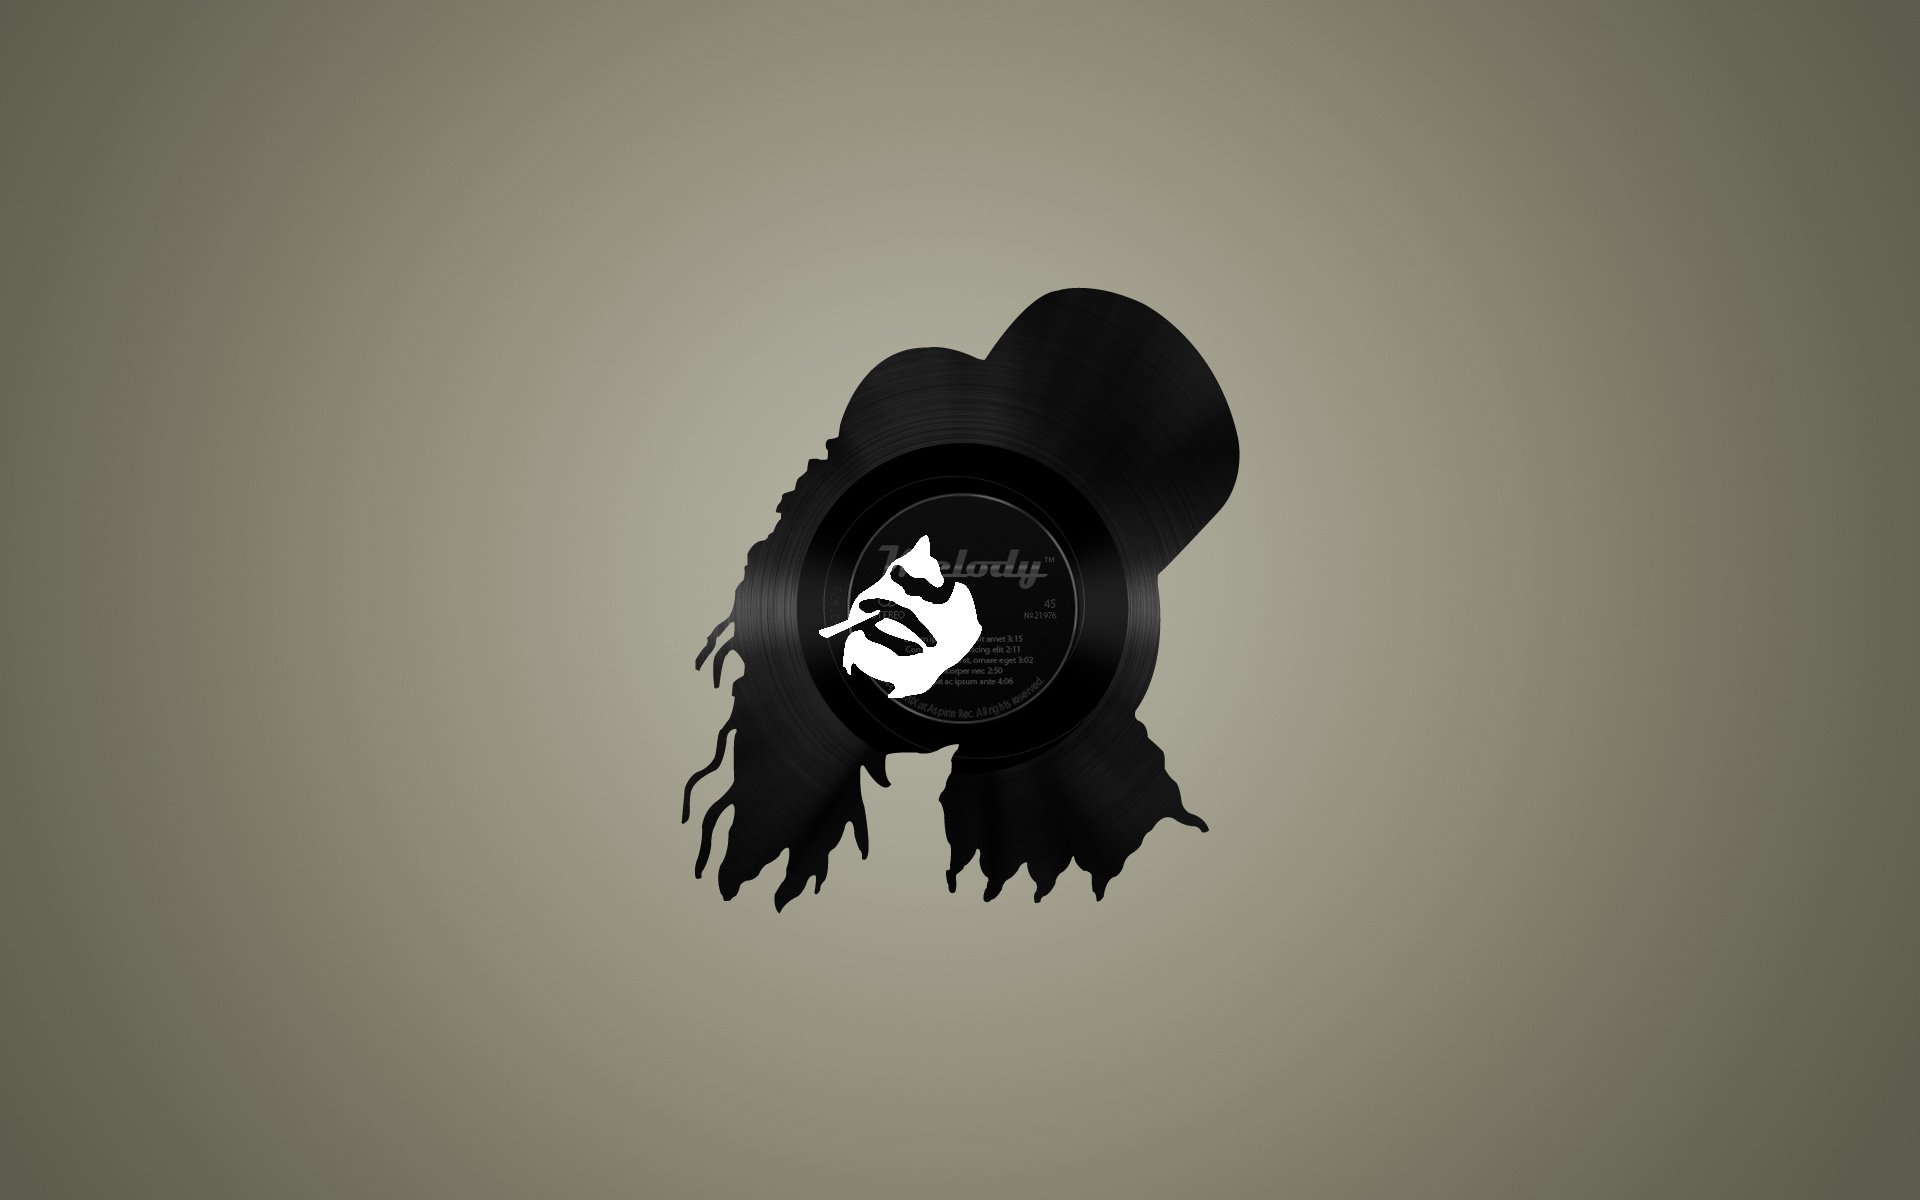 Slash Wallpaper  Download to your mobile from PHONEKY